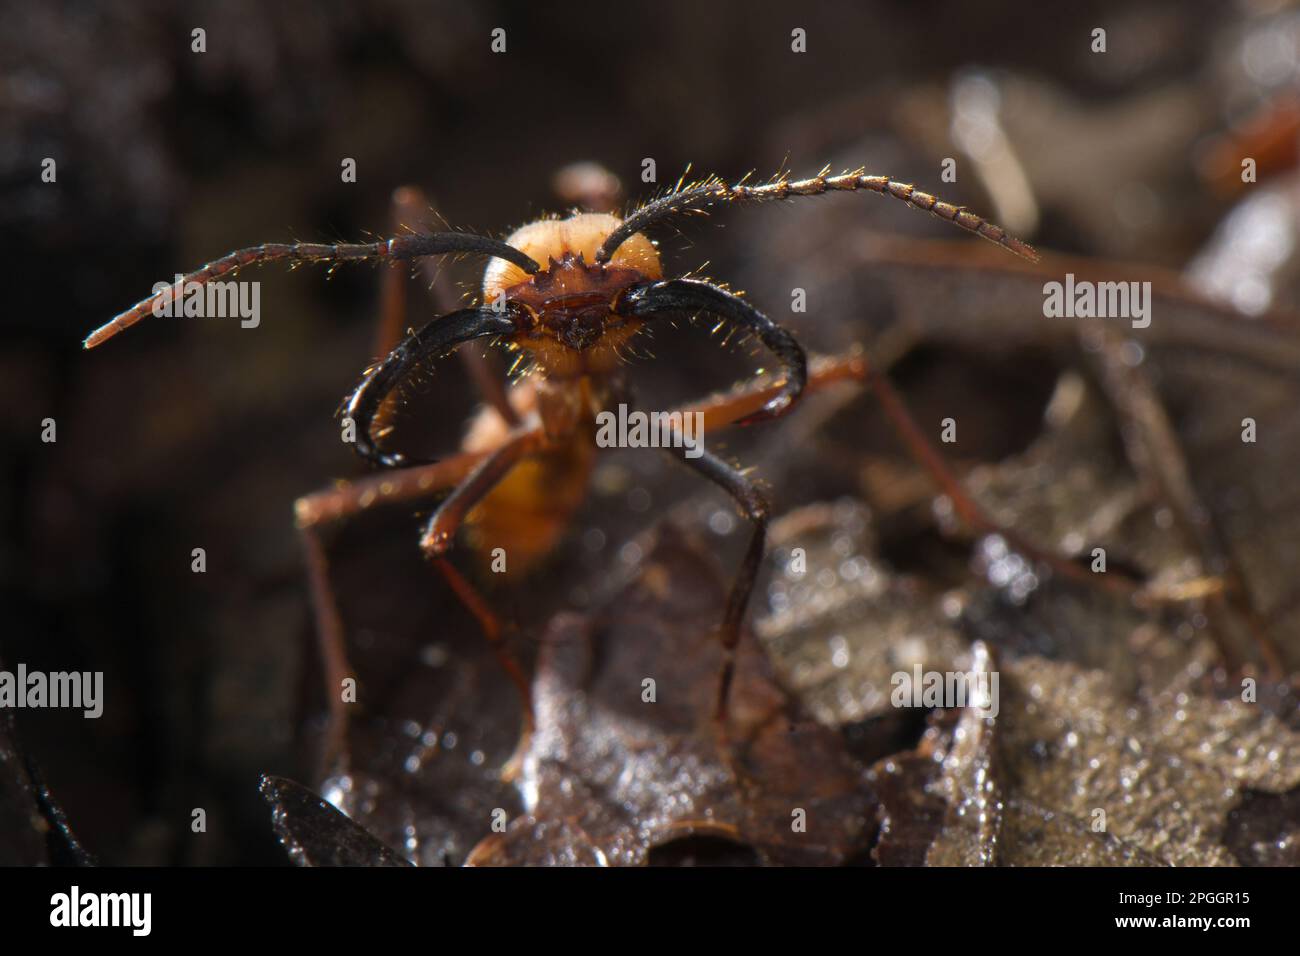 Burchell's army ant (Eciton burchellii) adult soldier, standing on leaf litter, Los Amigos Biological Station, Madre de Dios, Amazonia, Peru Stock Photo